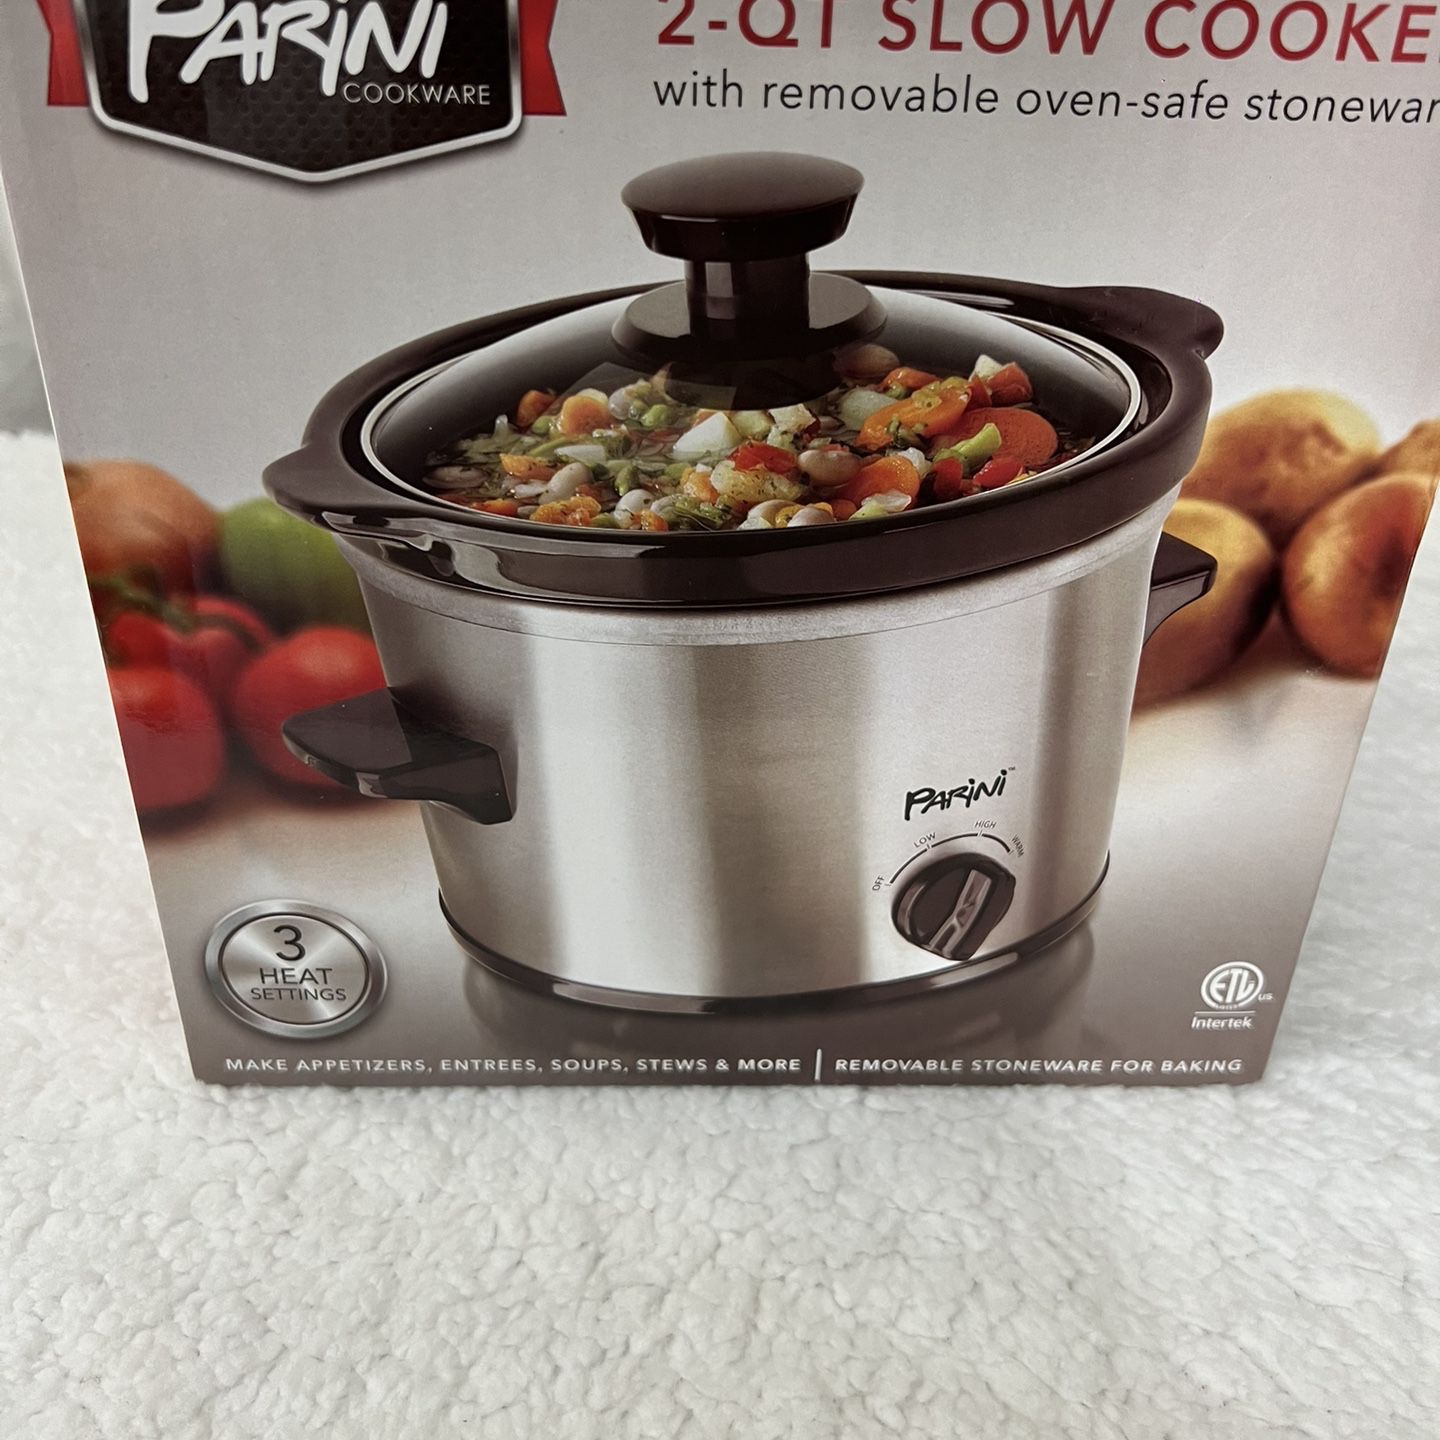 PARINI COOKWARE 4 QT SLOW COOKER for Sale in New York, NY - OfferUp